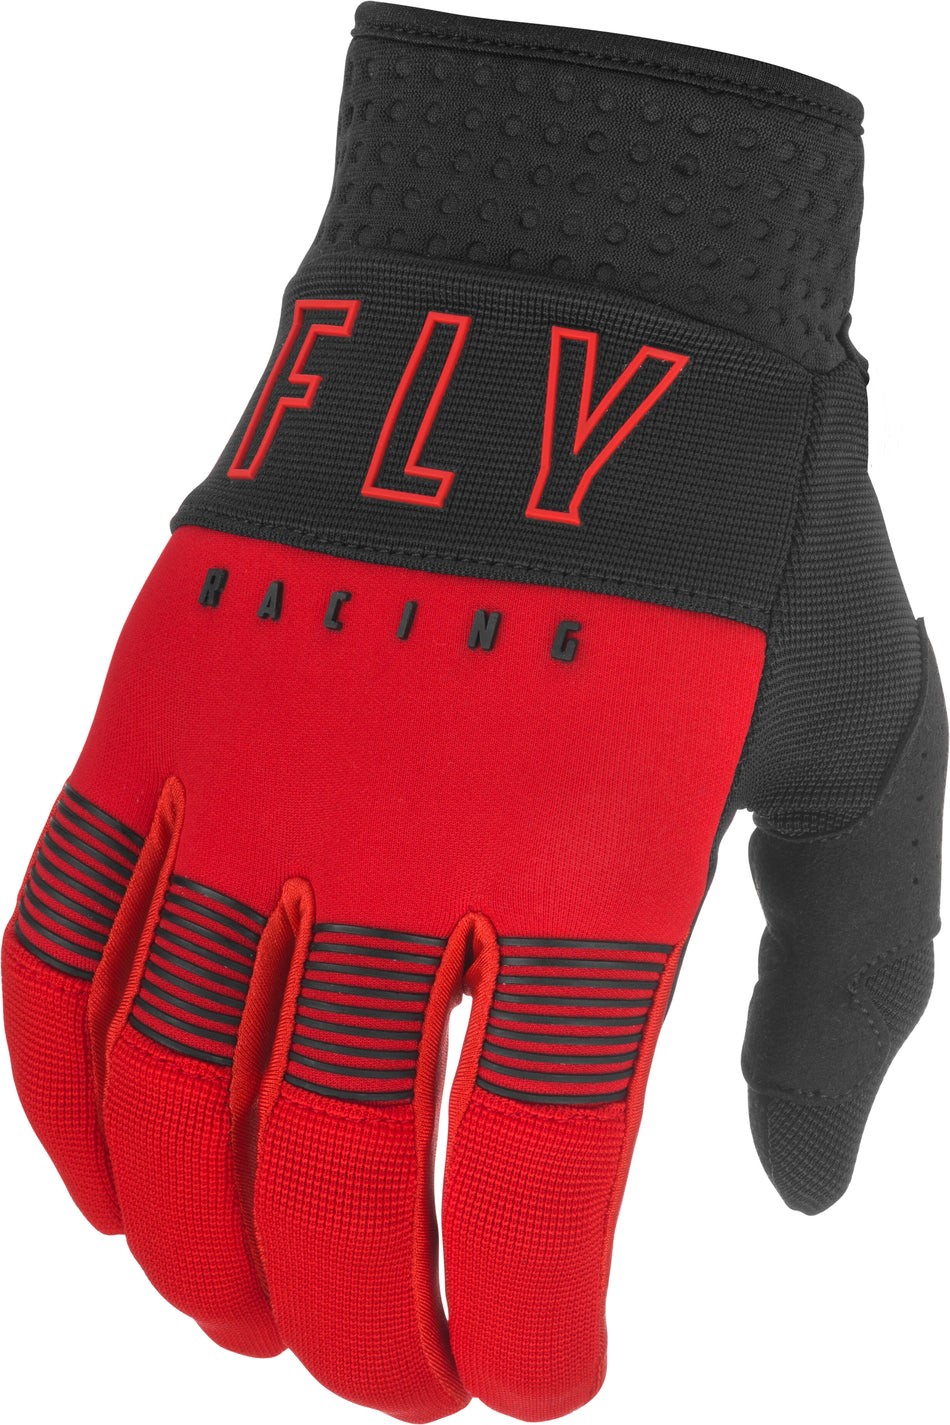 FLY RACING F-16 Gloves Red/Black Sz 09 374-91209